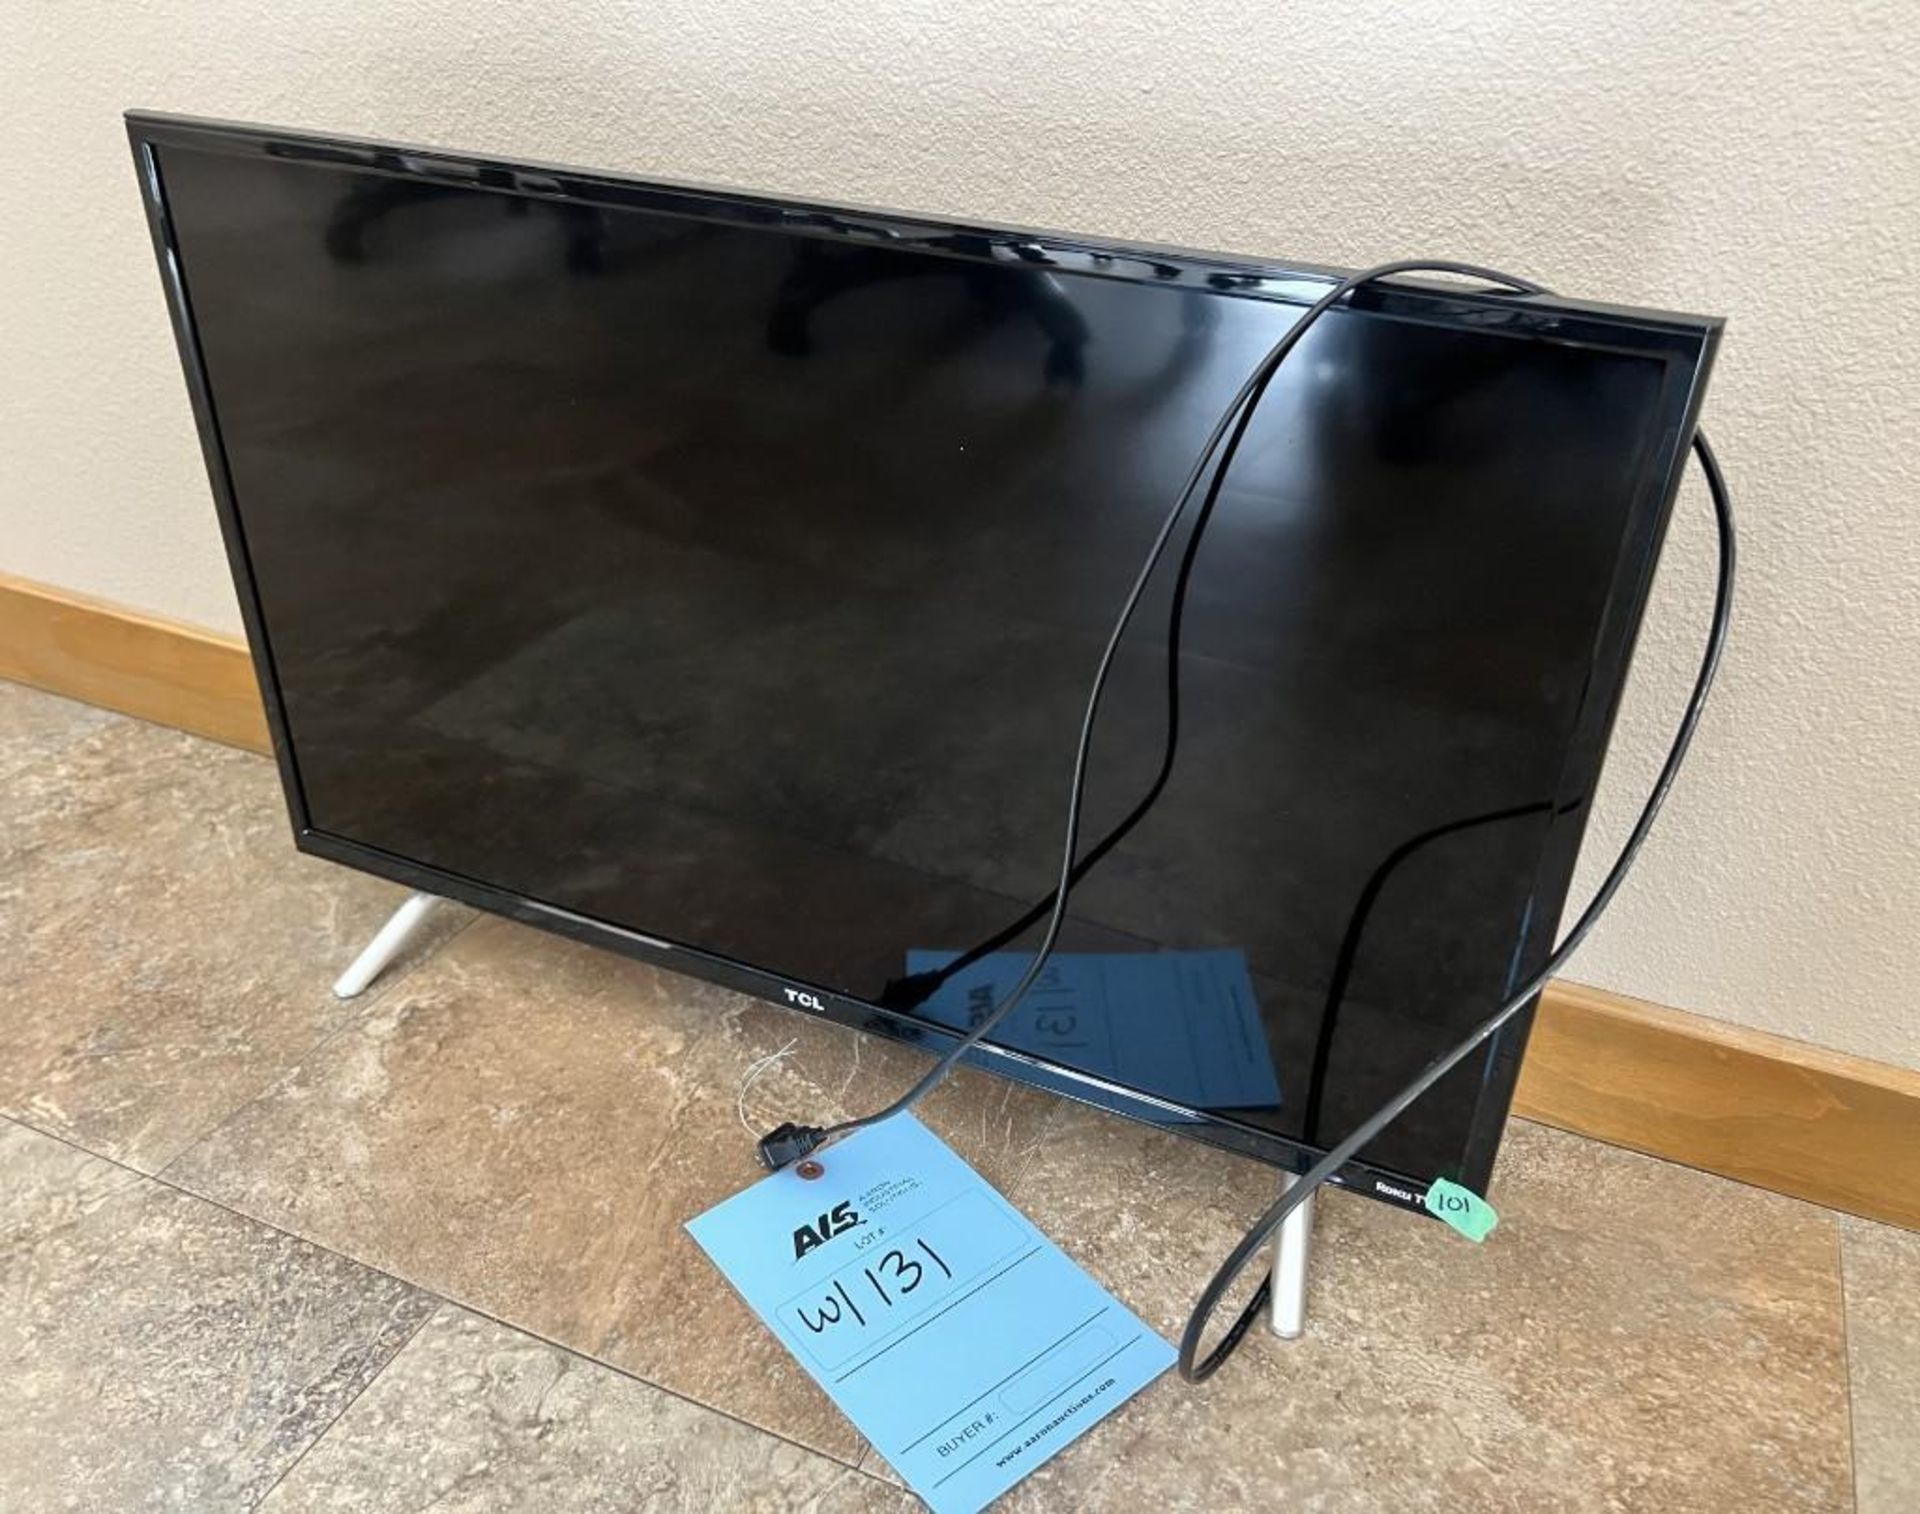 Lot Consisting Of: (1) Sony model XBR-65X800G TV, (1) TCL Roku model 32S305 TV, (5) Jamo in wall spe - Image 5 of 10